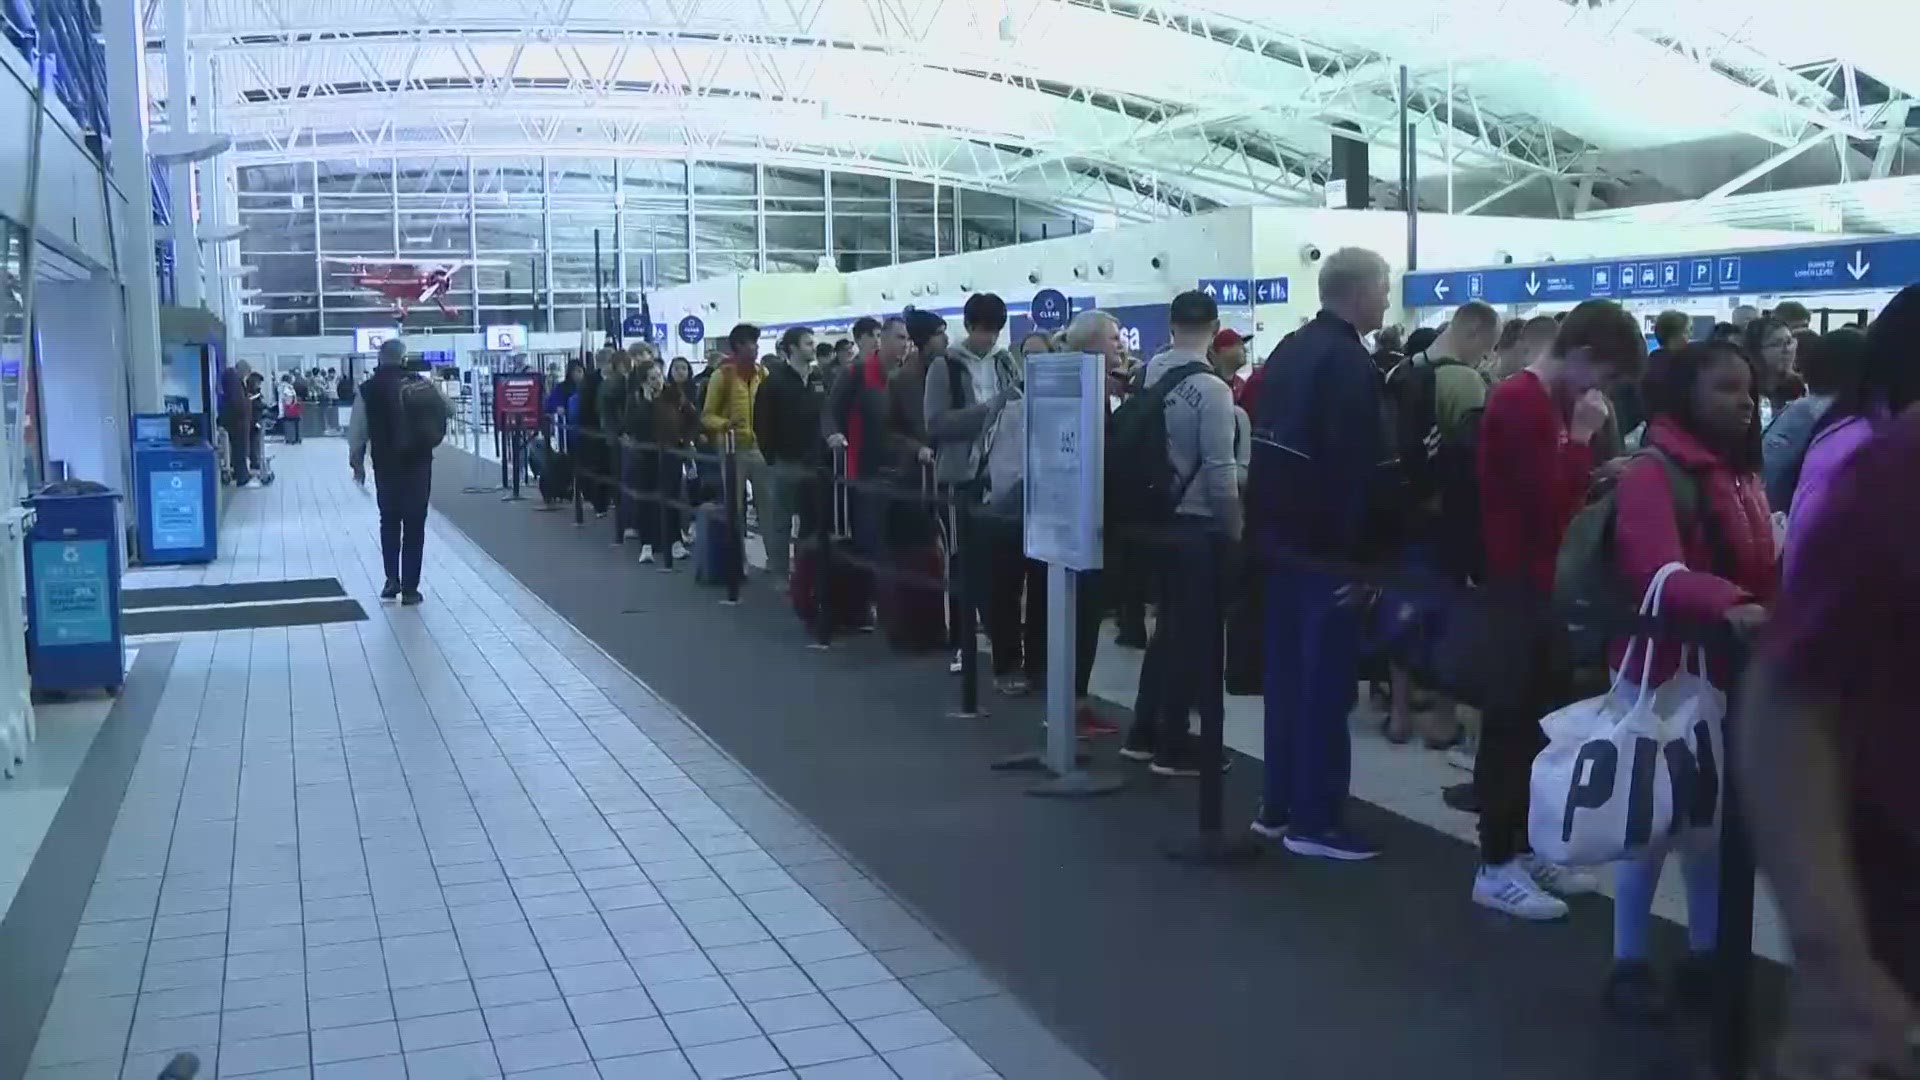 Hundreds of passengers flood American airports ahead of the holiday travel rush. The Thanksgiving holiday is just days away.